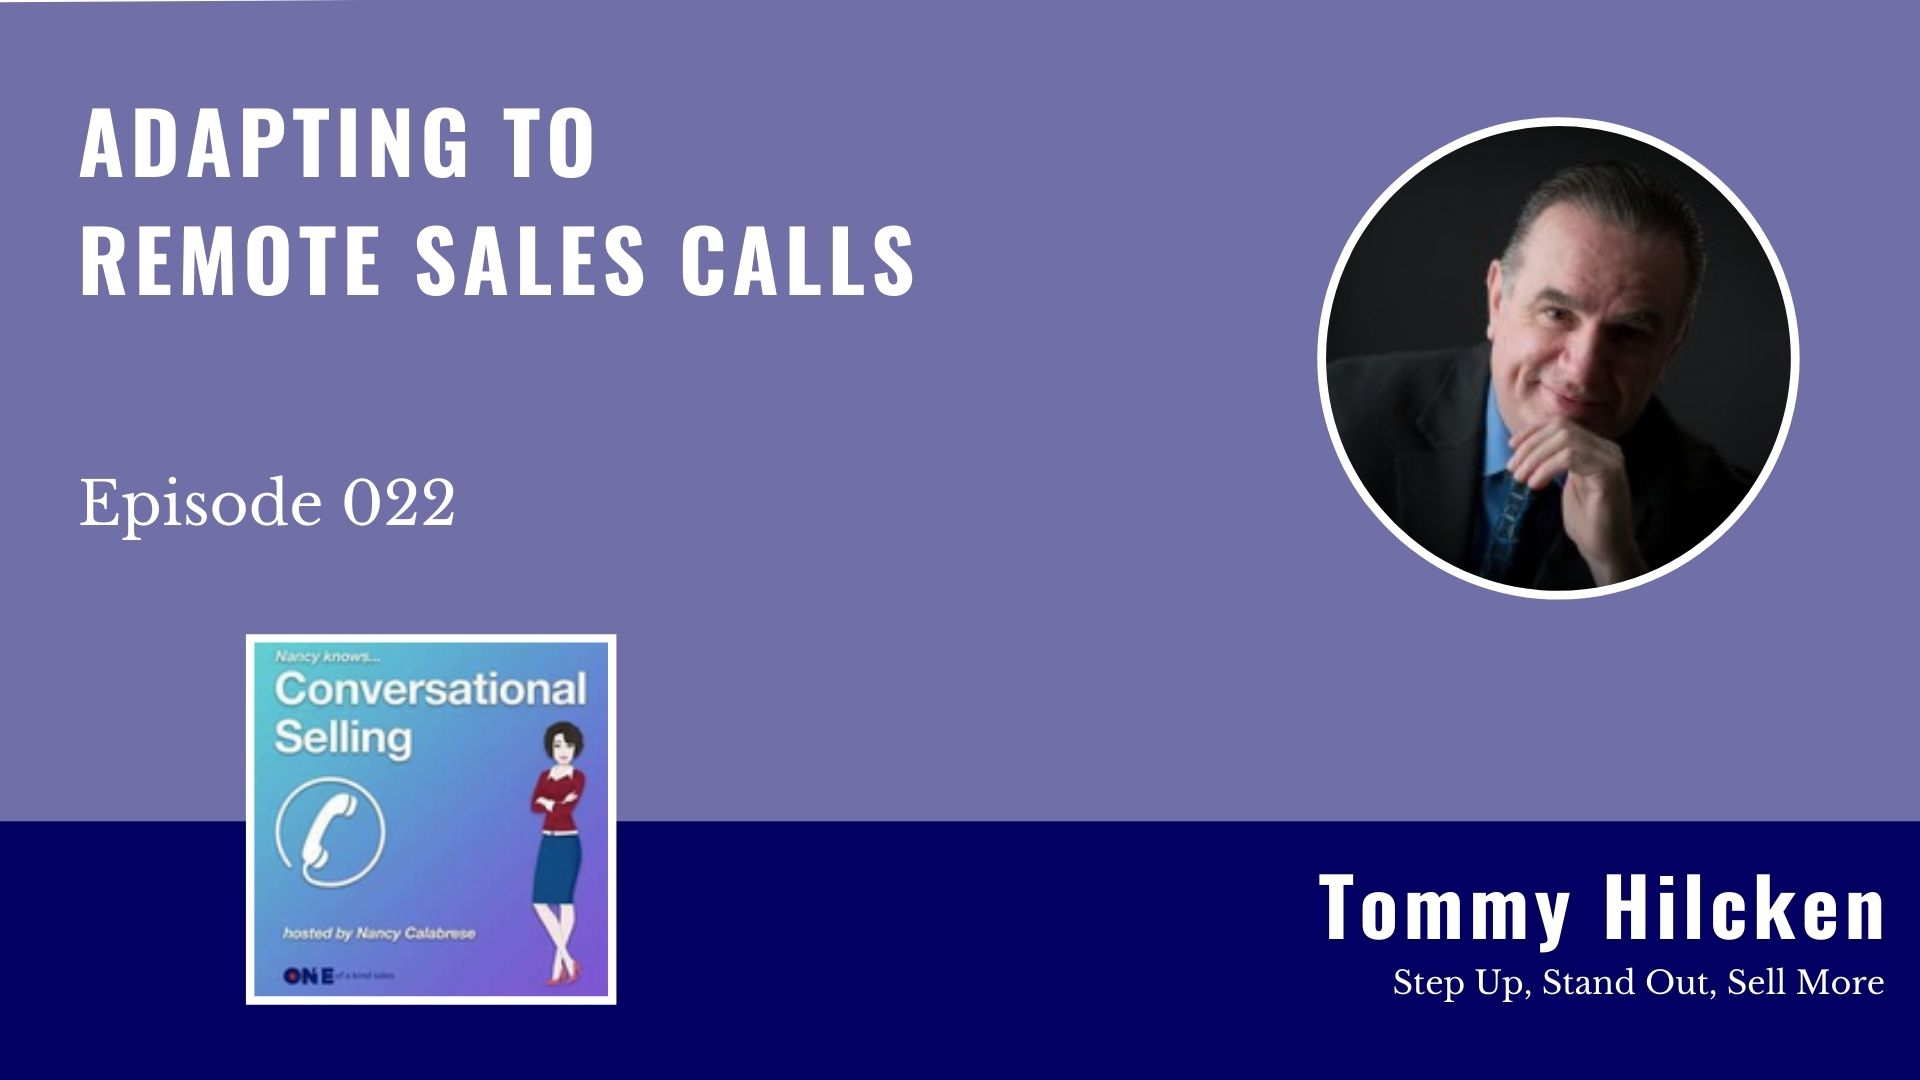 Tommy Hilcken | Adapting to Remote Sales Calls